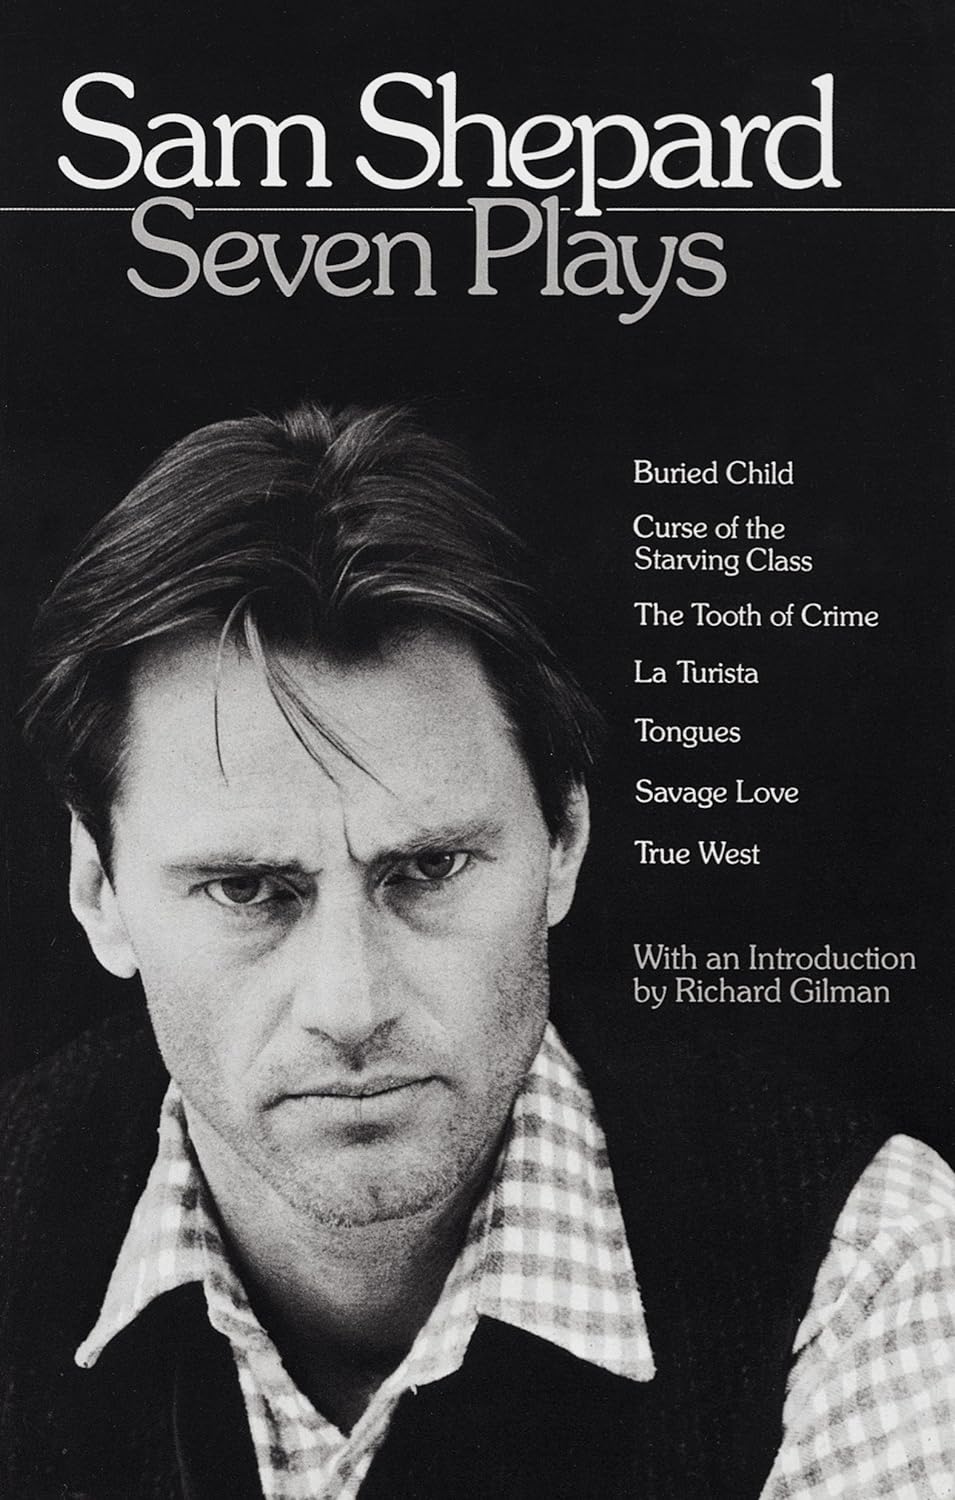 Seven Plays: Buried Child, Curse of the Starving Class, The Tooth of Crime, La Turista, Tongues, Savage Love, True West - Sam Shepard